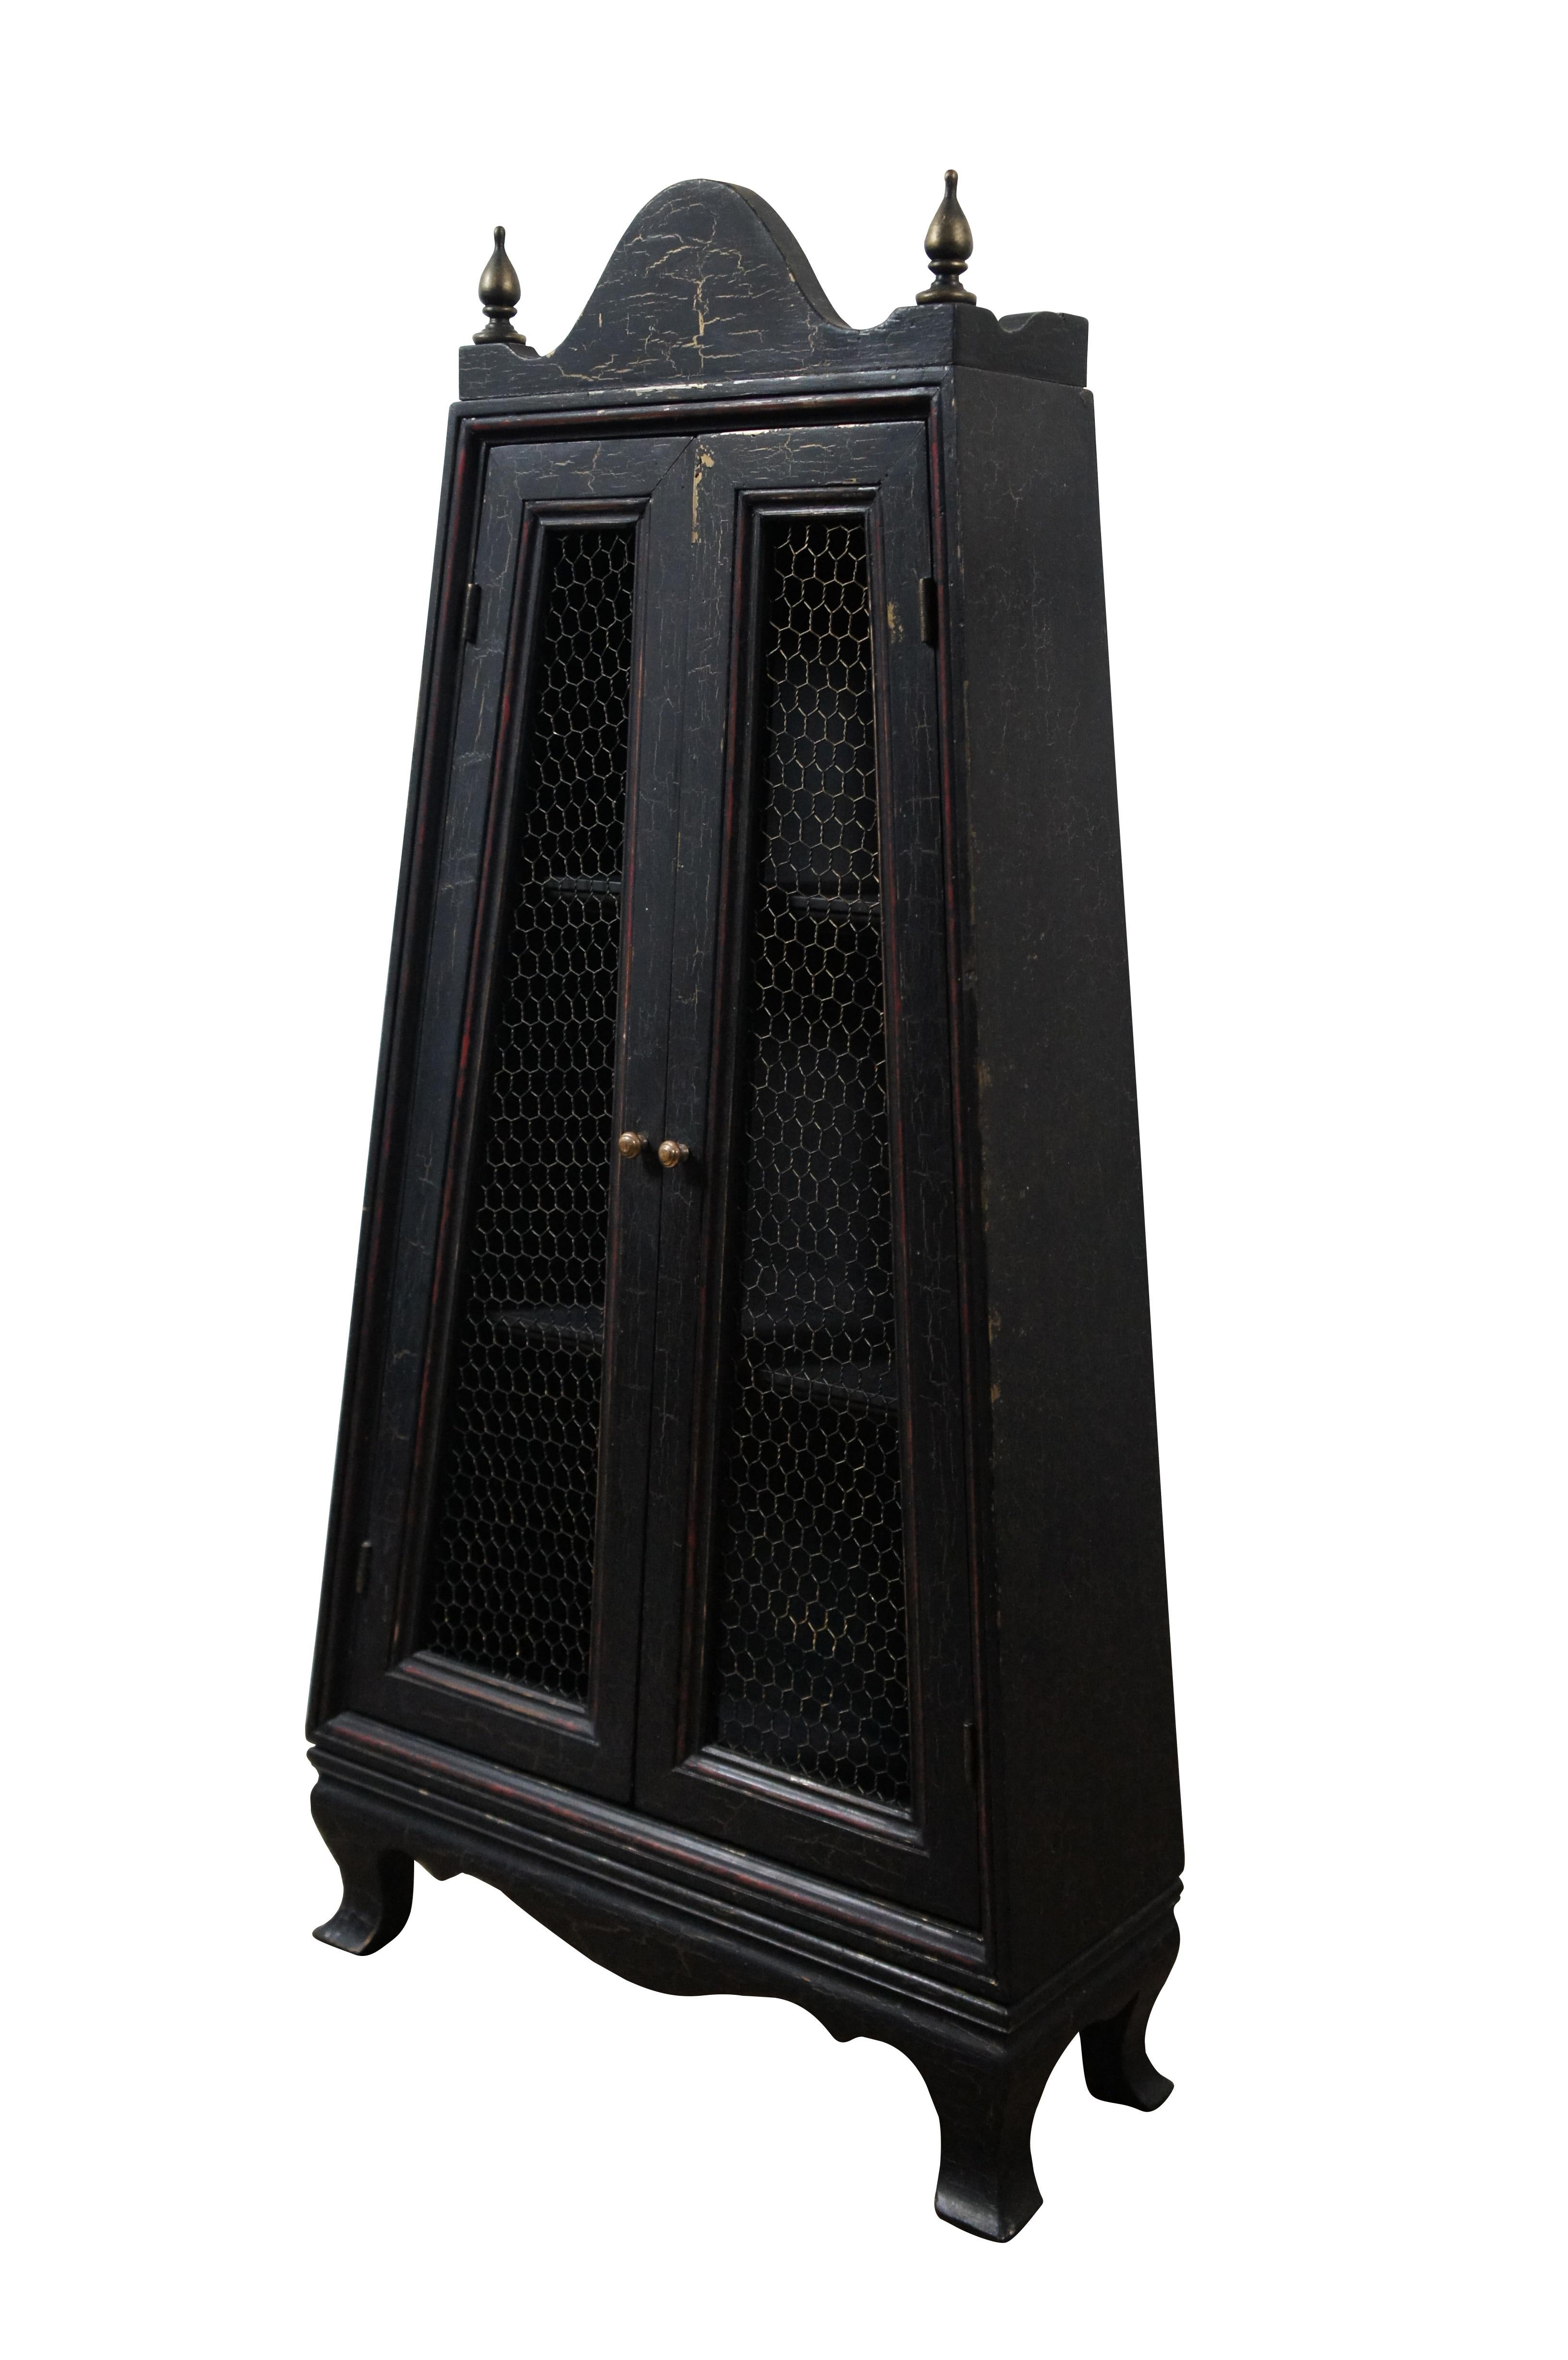 Vintage wall hanging curio display cabinet.  Made of wood featuring French Country styling with black and red crackle paint finish, serpentine accents, gold finials and chicken wire doors.

Dimensions:
17” x 6” x 24.5” (Width x Depth x Height)